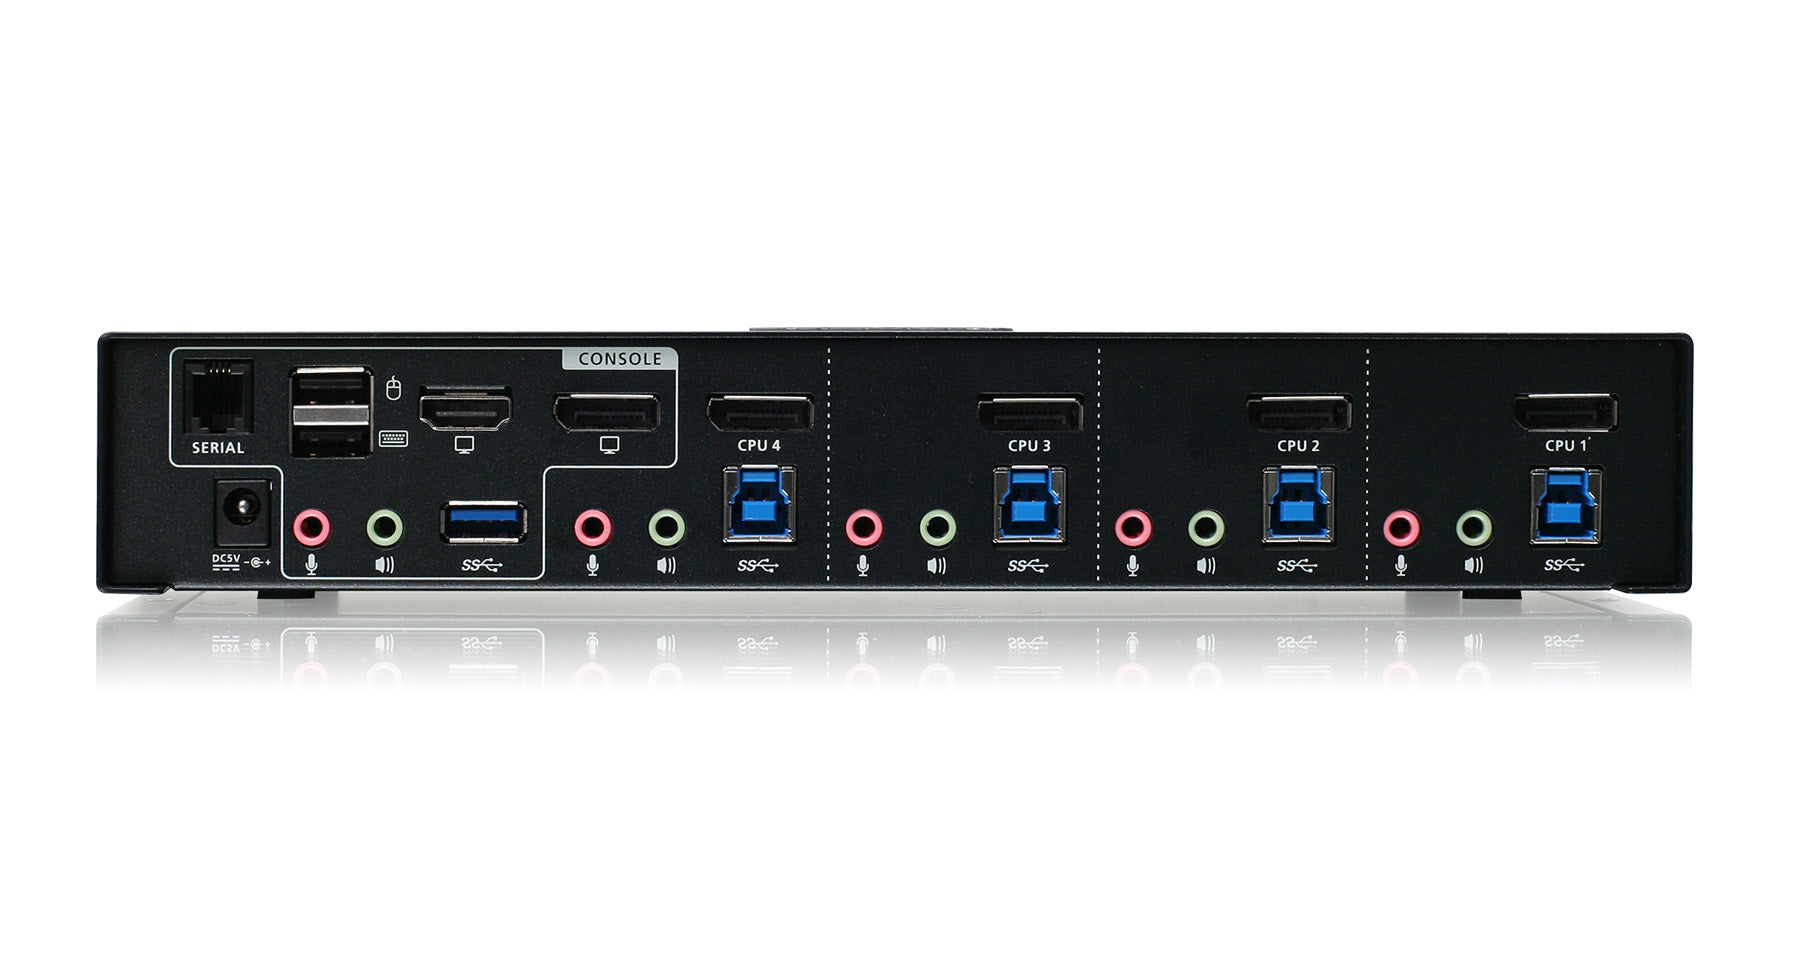 4-Port 4K DisplayPort KVMP Switch with Dual Video Out and RS-232